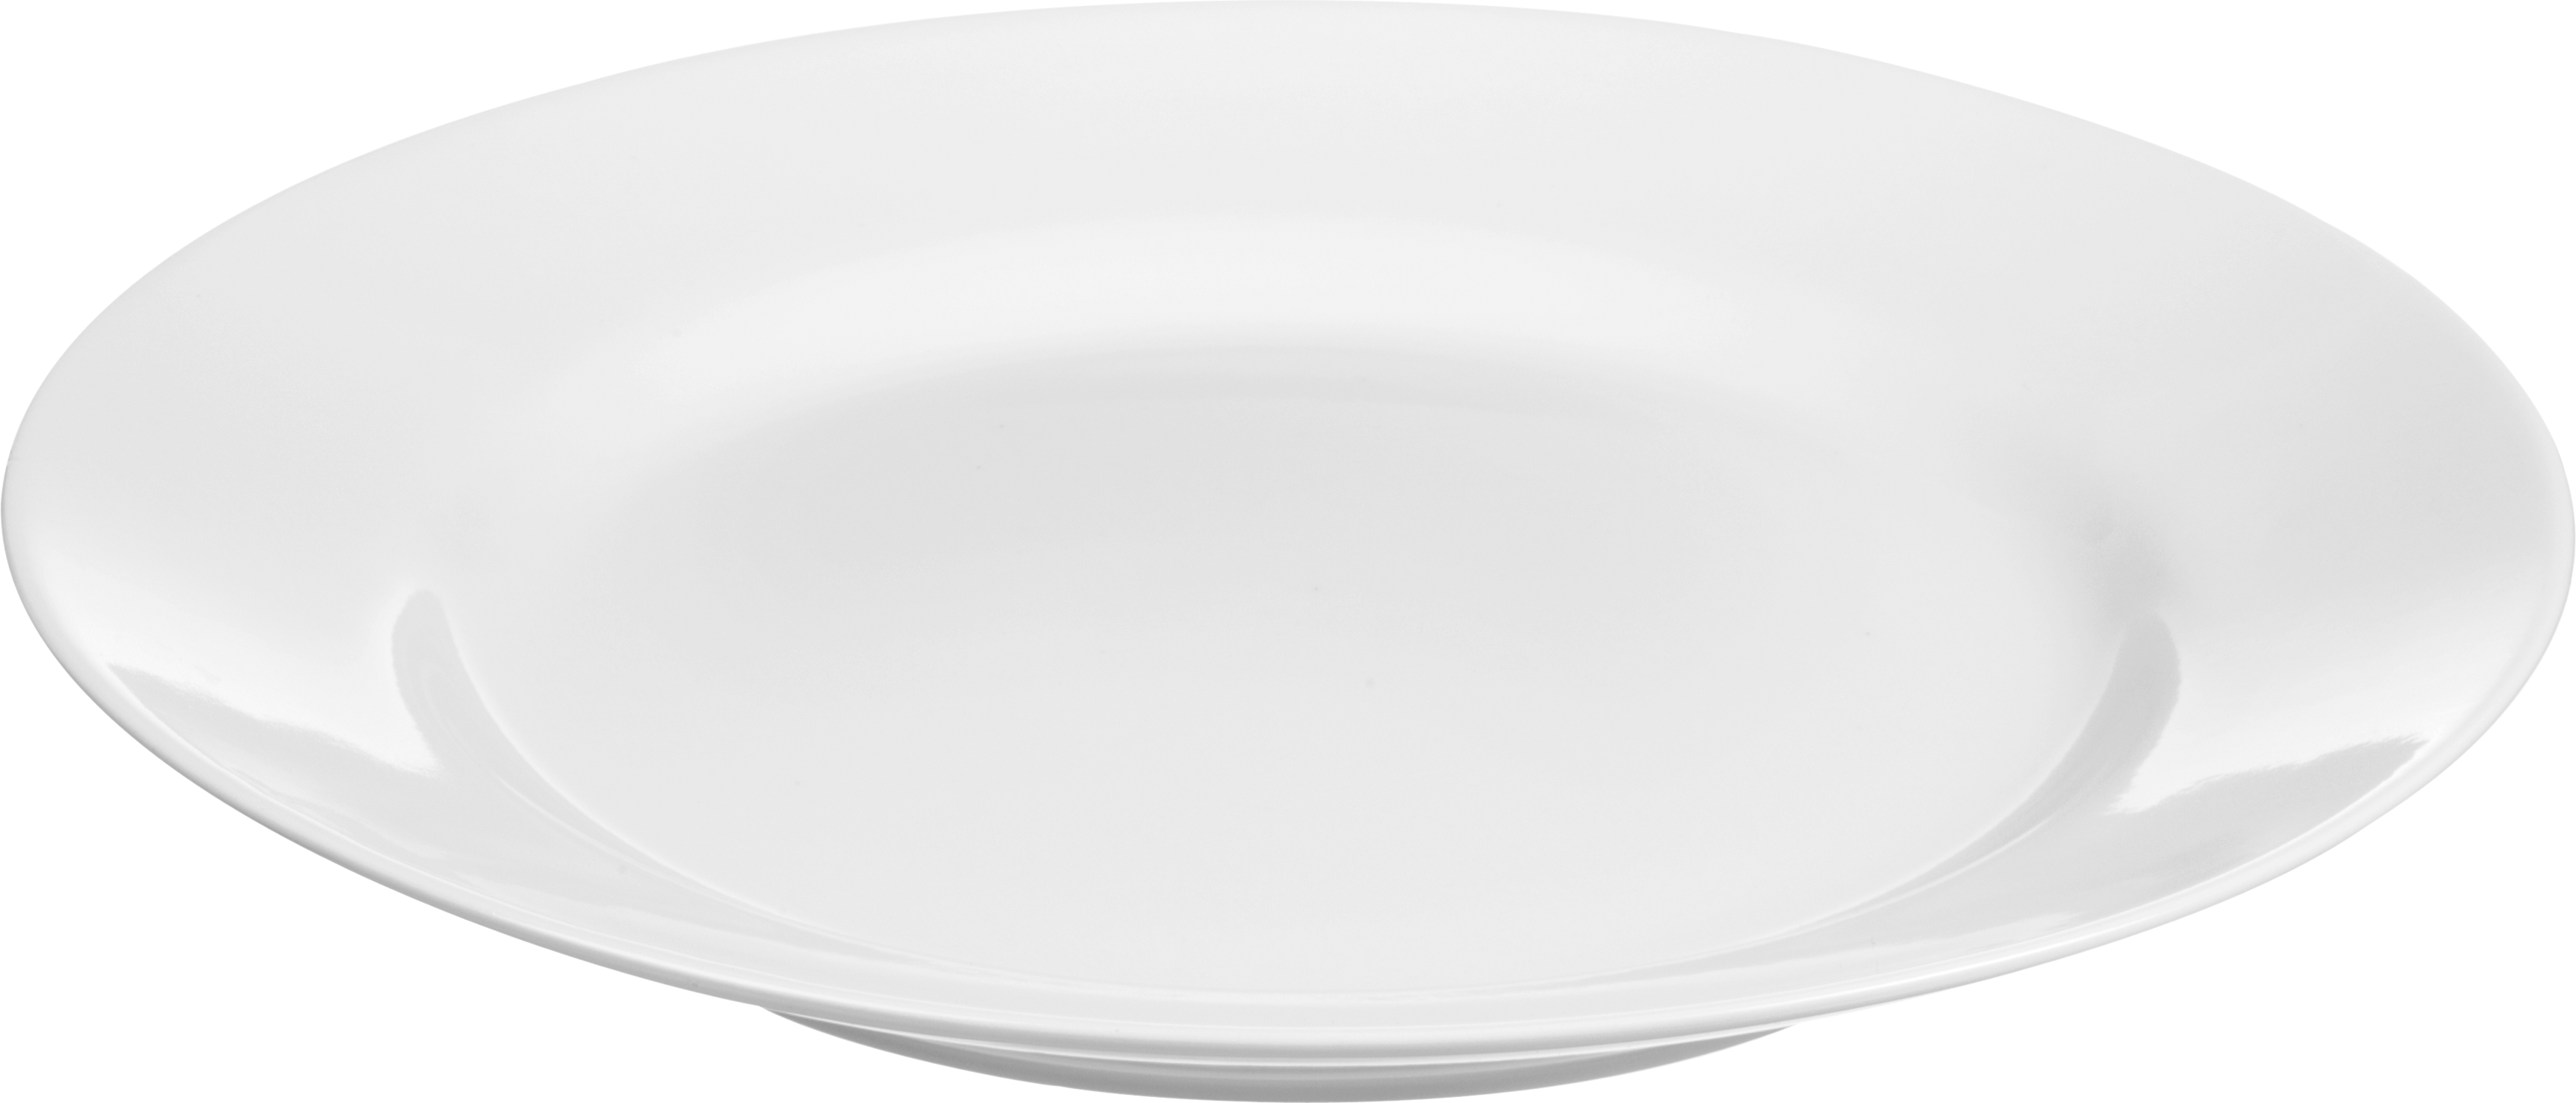 White Dinner Plate Transparent Background PNG